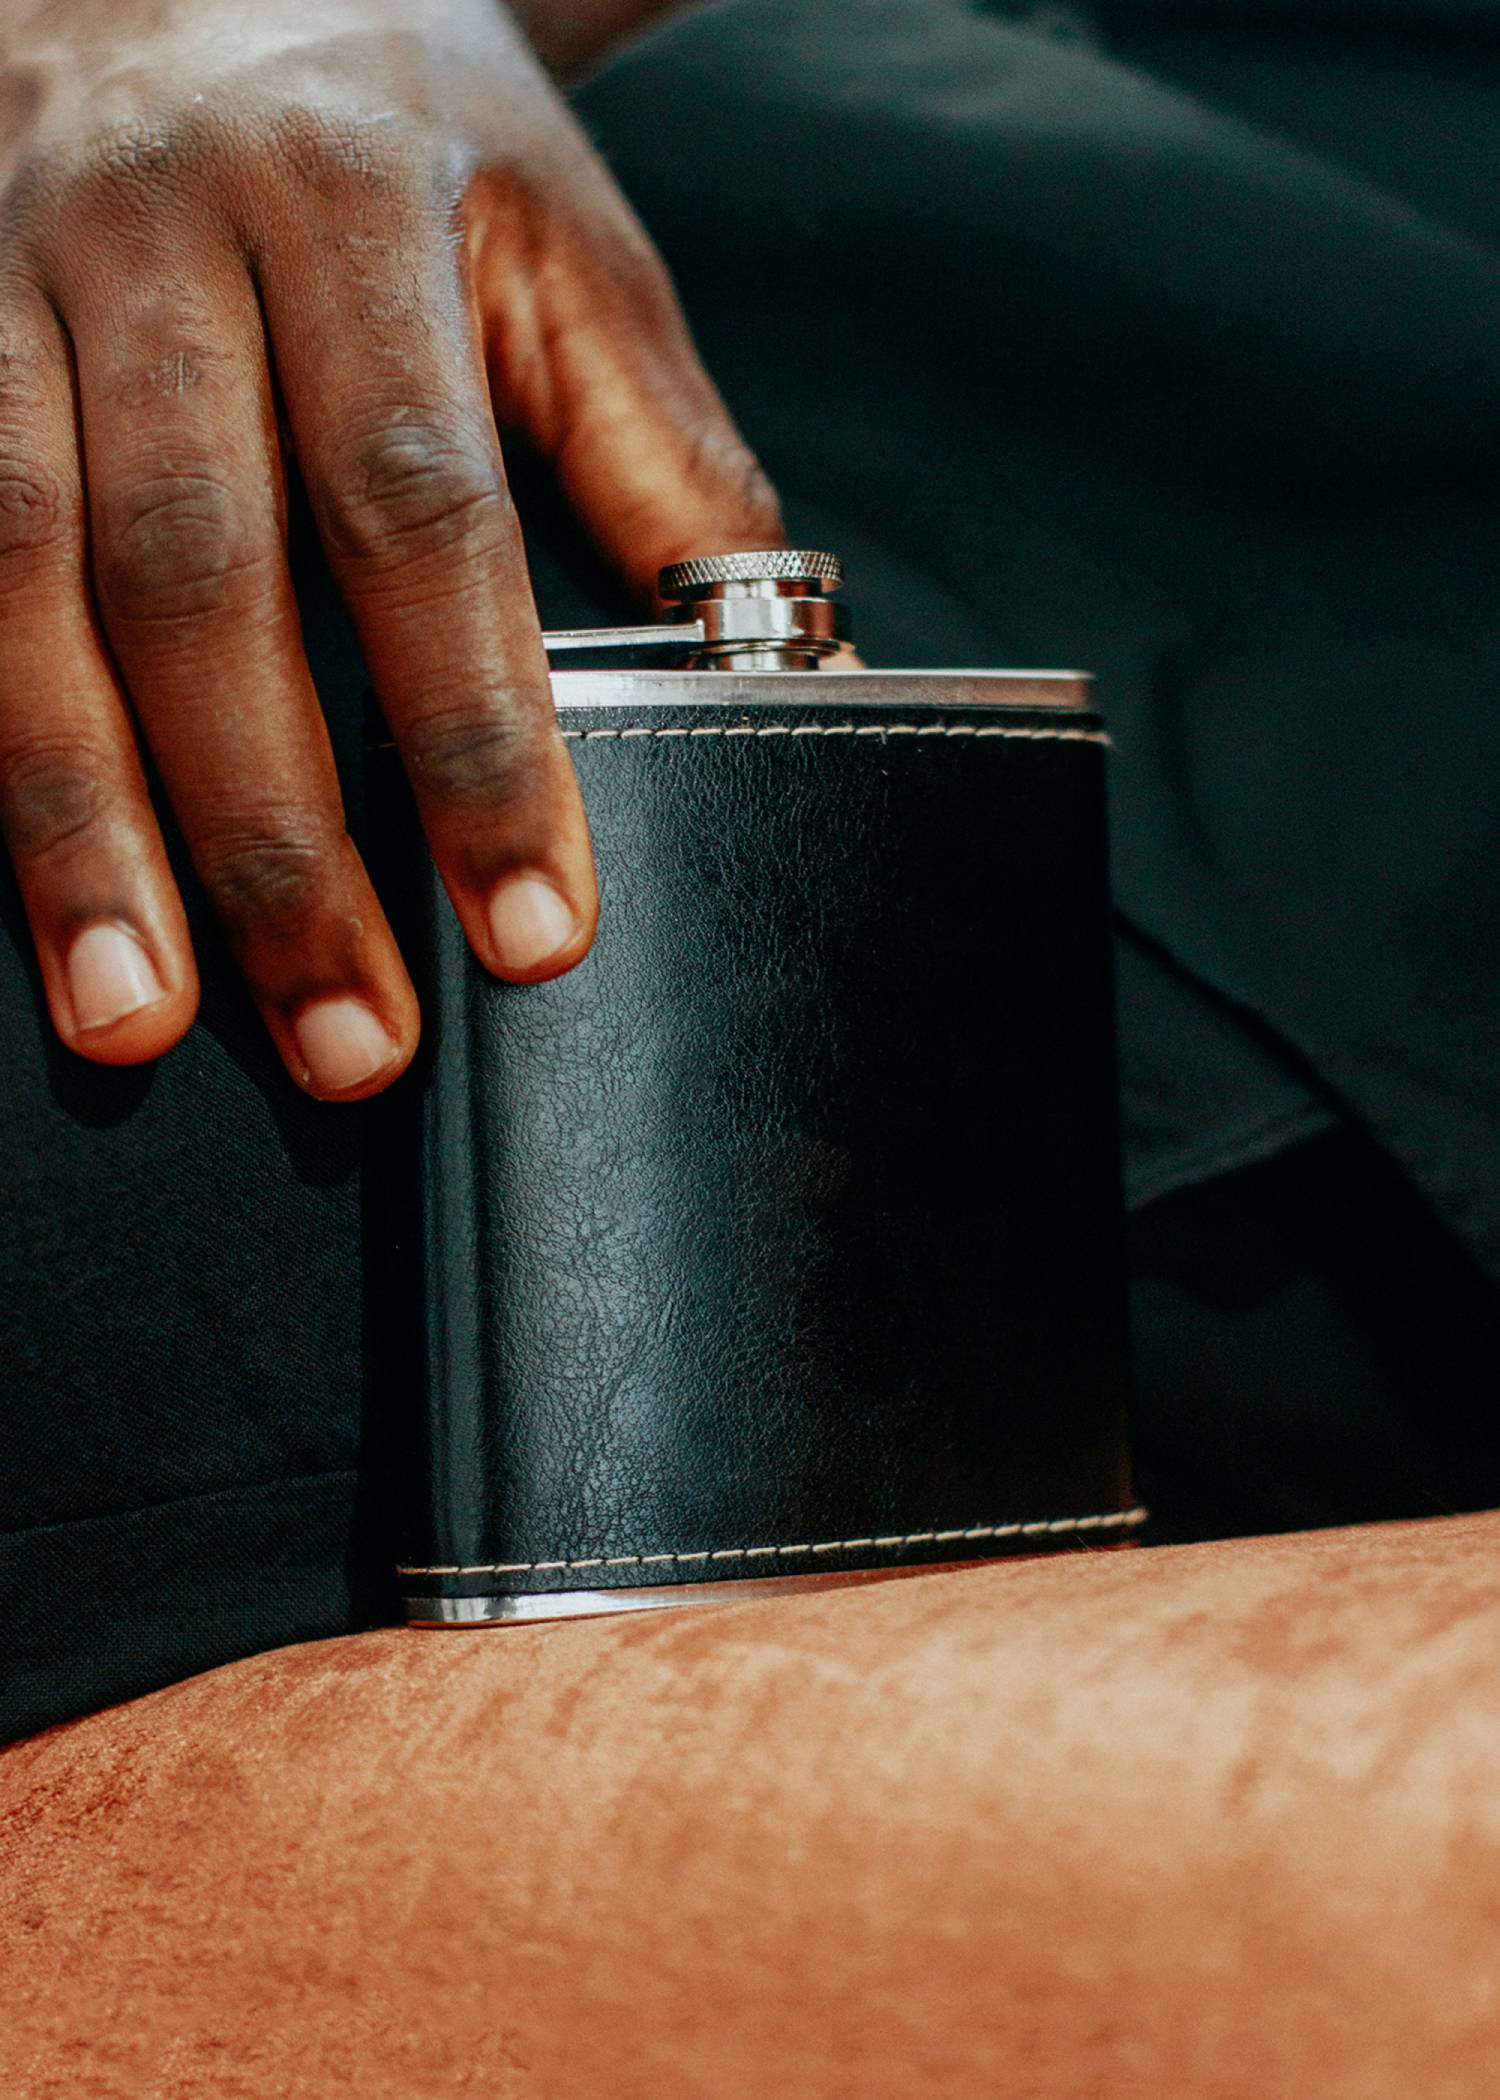 Featured image for “How to Use a Hip Flask: A Modern Guide”